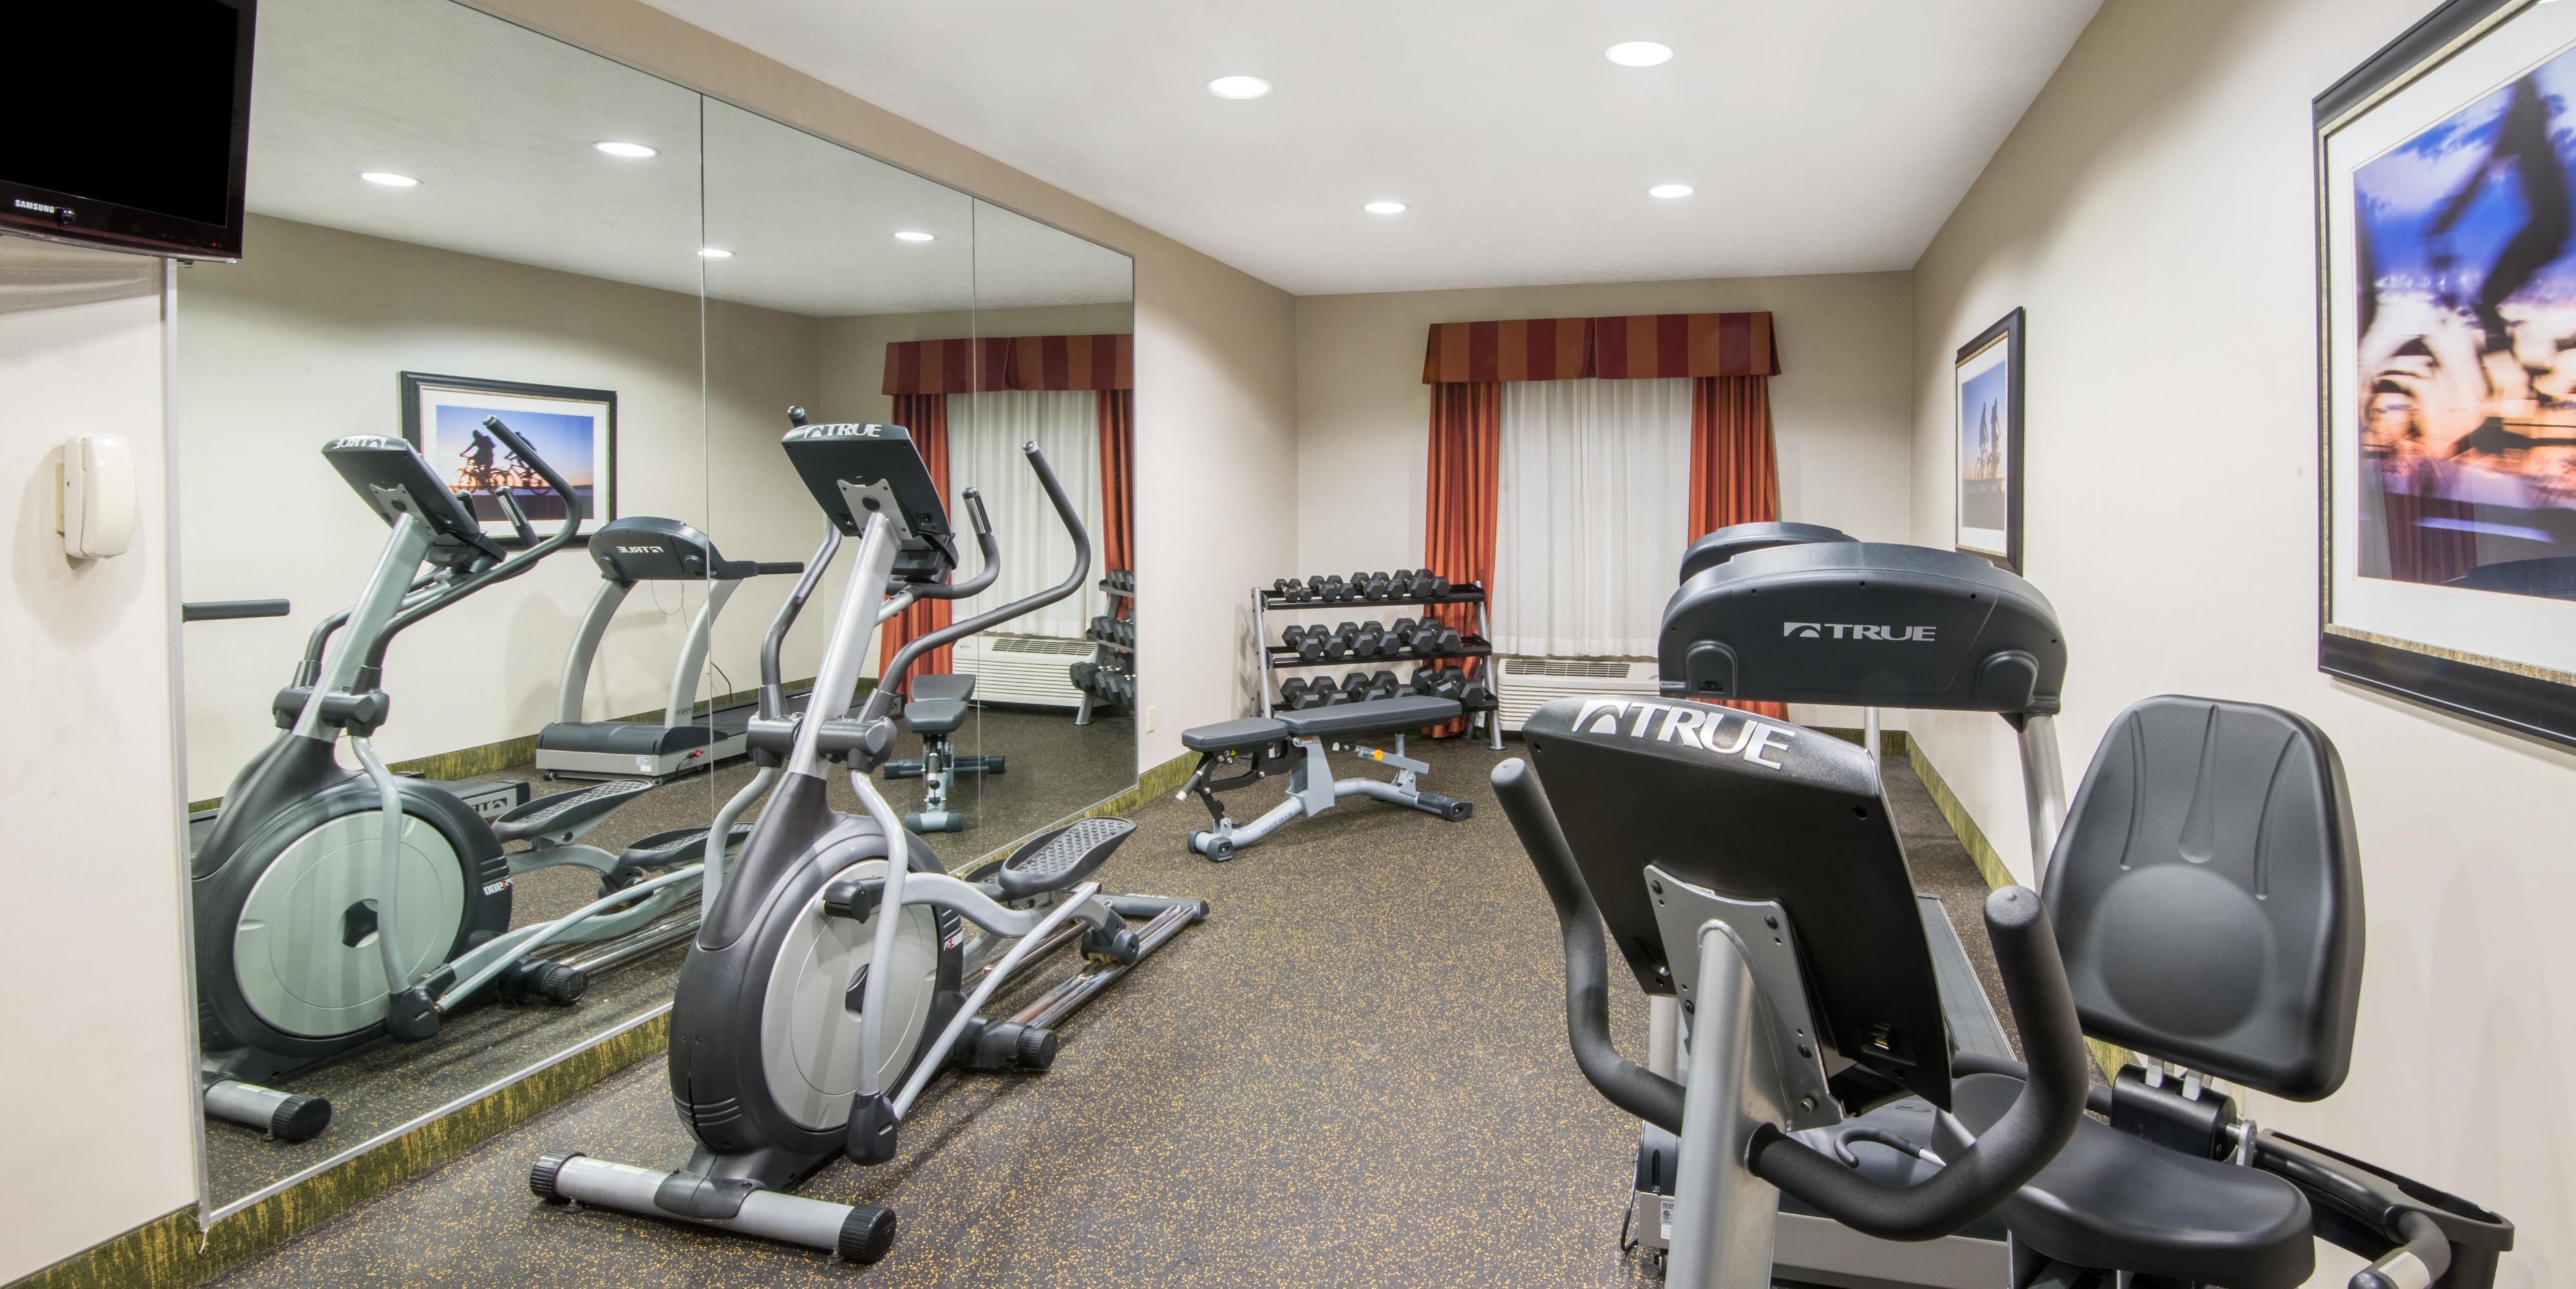 Our 24-hour fitness center is designed to accommodate your fitness needs around the clock. Whether you enjoy cardio, a low-intensity workout, or weights, you’ll be able to stay active and energized on your schedule. 